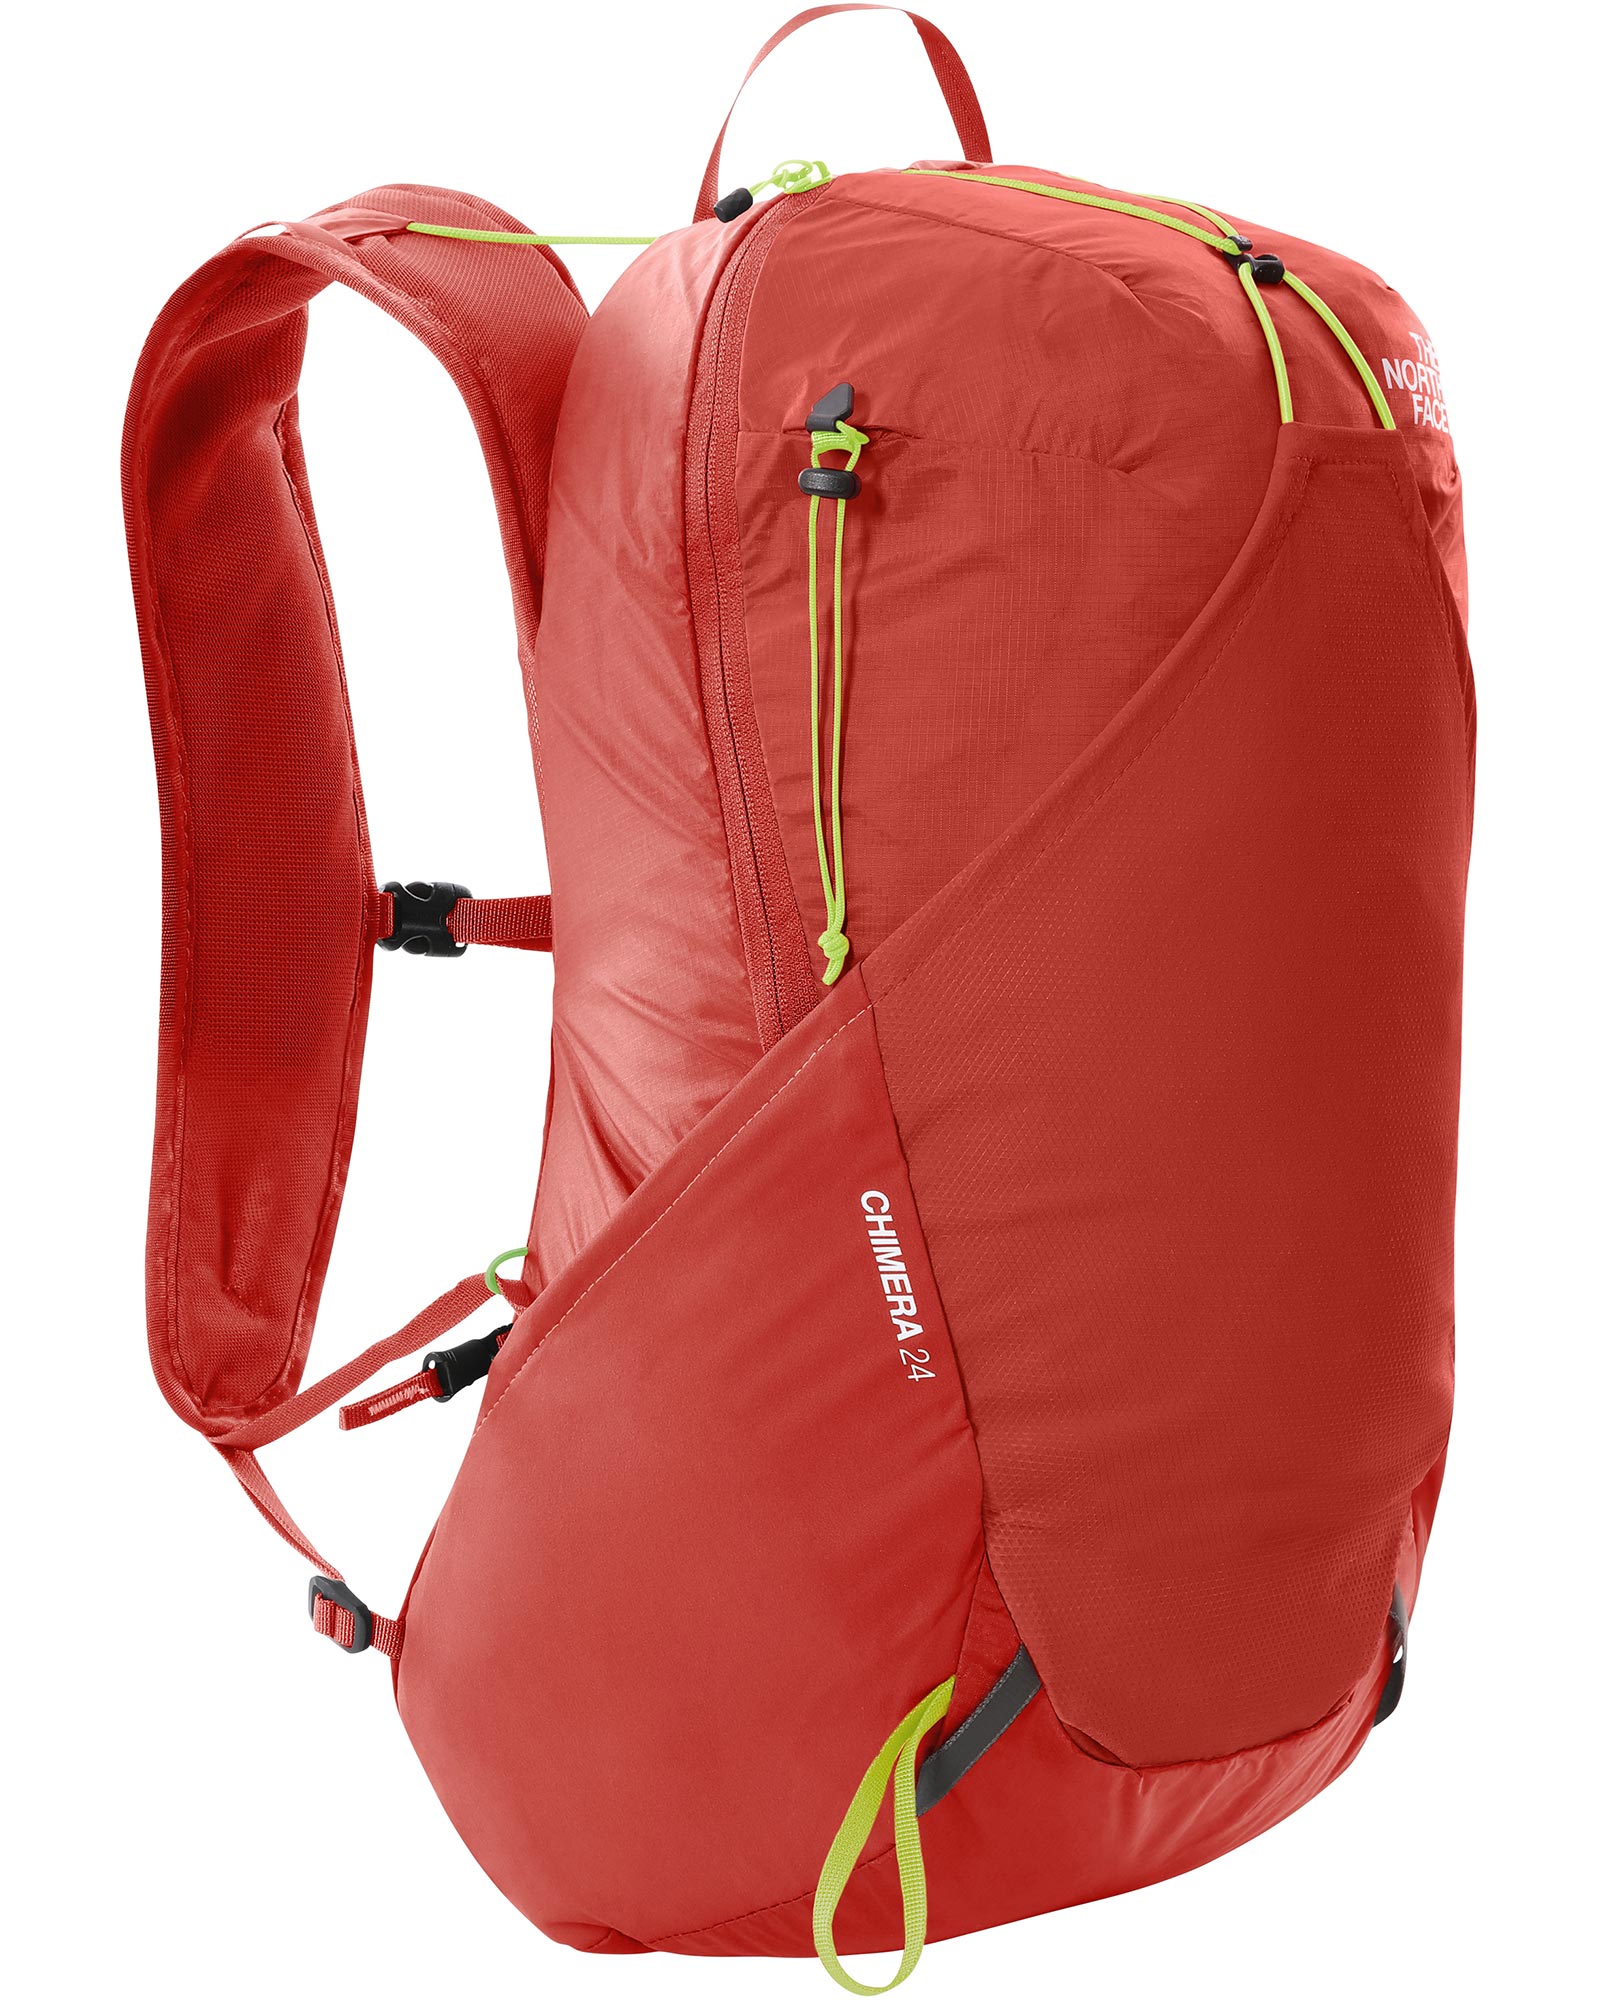 The North Face Chimera 24 Women’s Backpack - Tandori Spice Red/Sharp Green